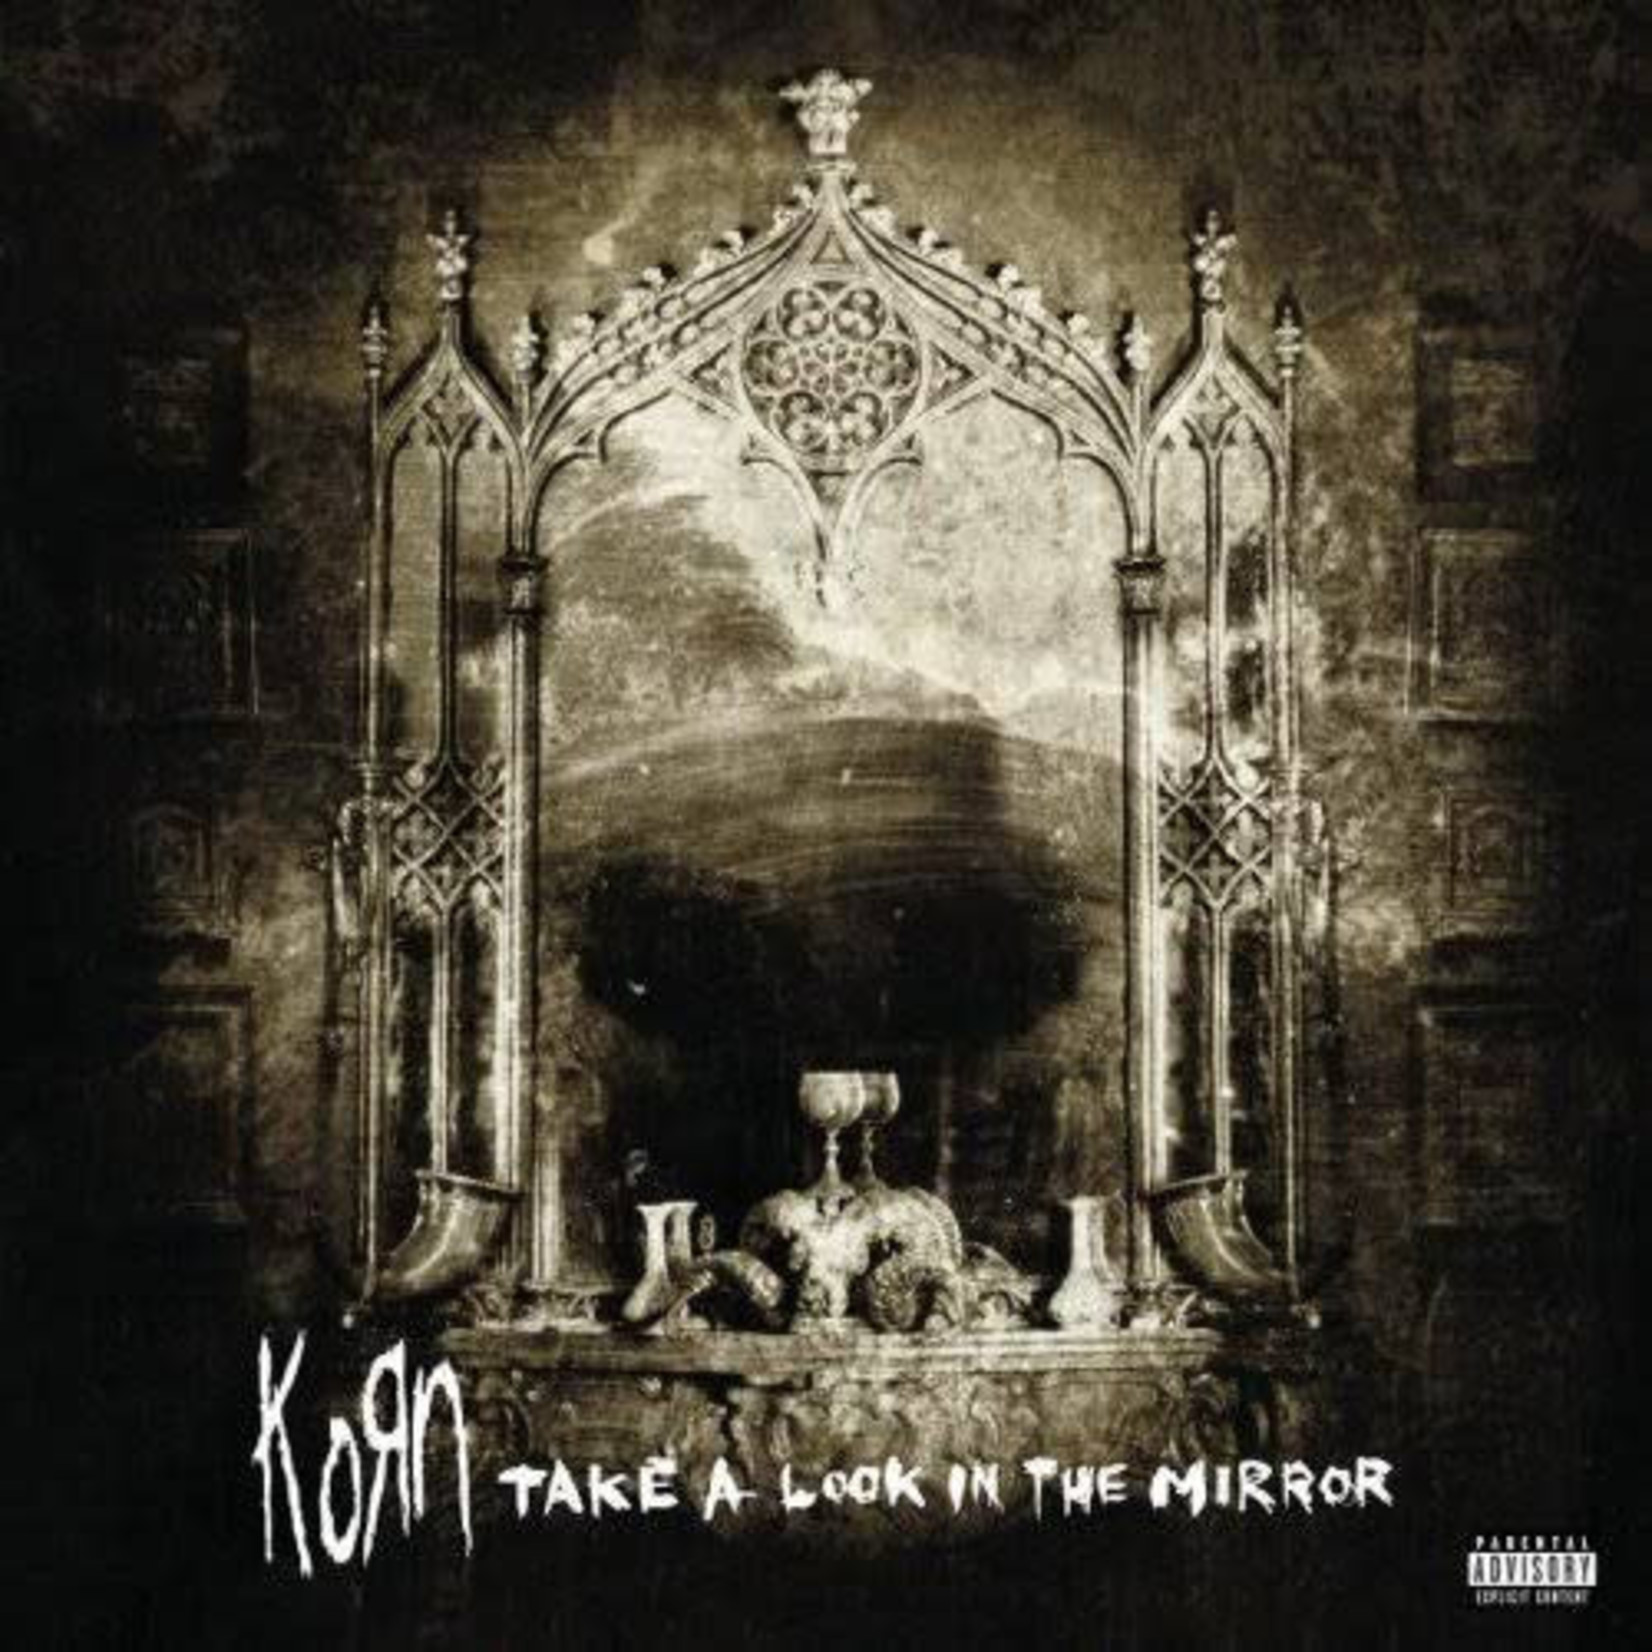 [New] Korn - Take A Look In The Mirror